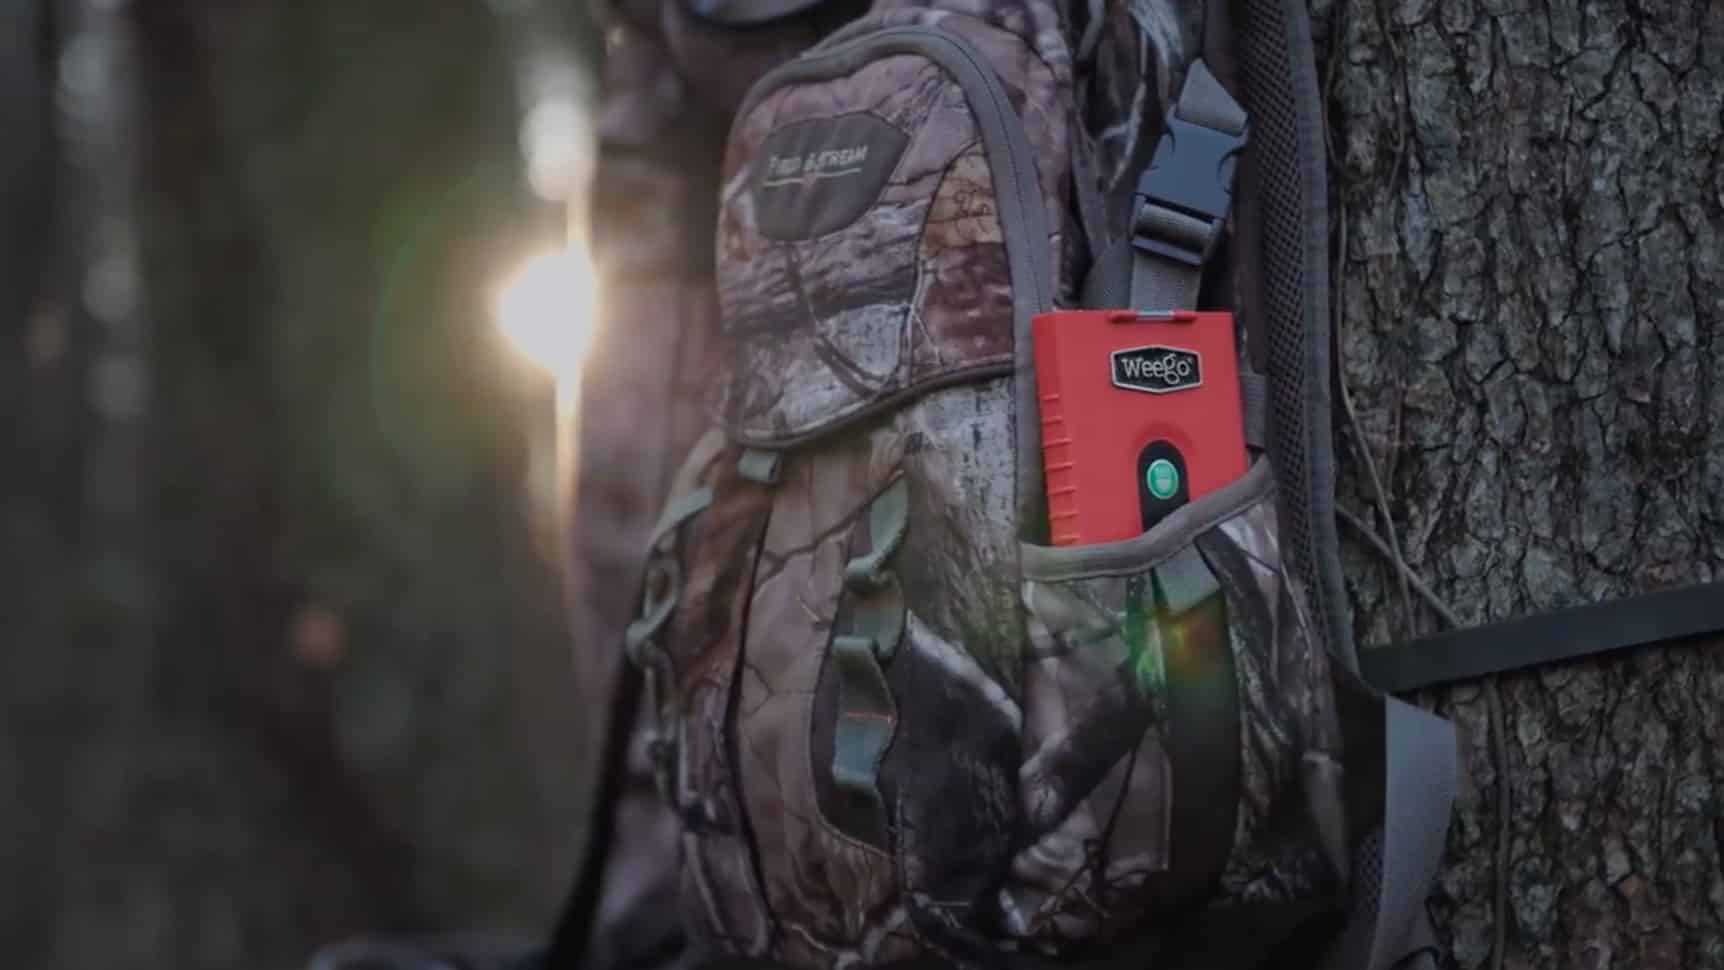 The perfect hunting companion